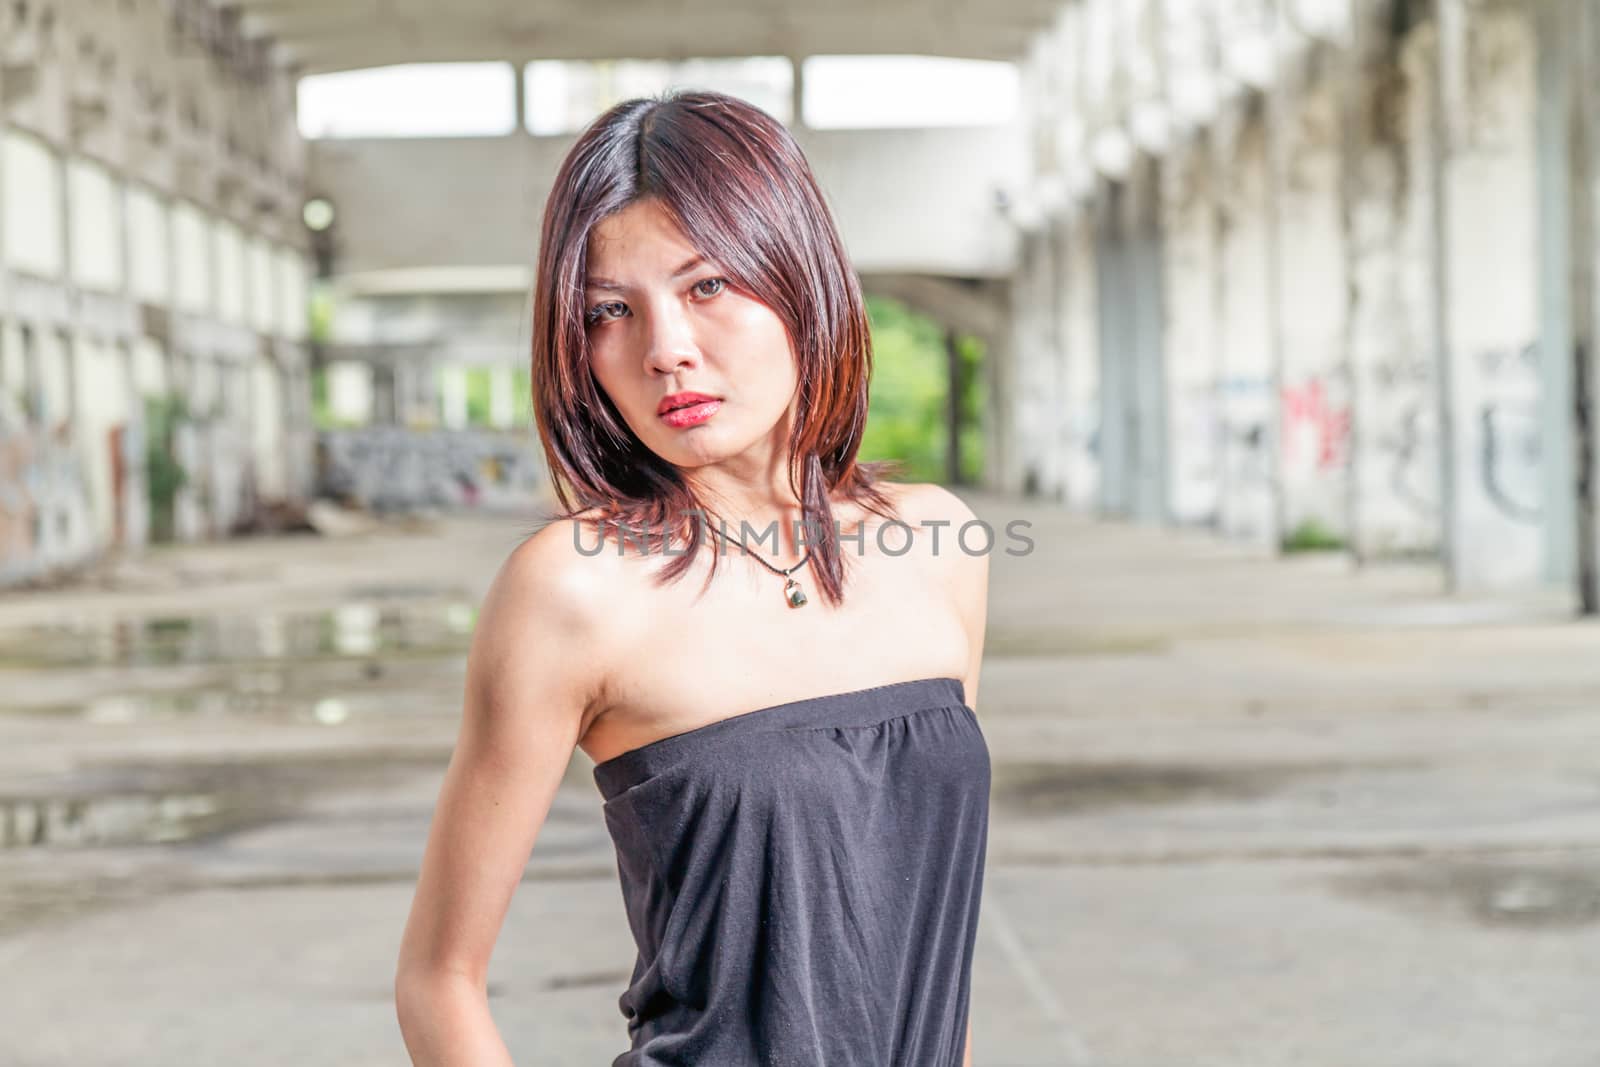 Chinese woman standing in abandoned building by imagesbykenny